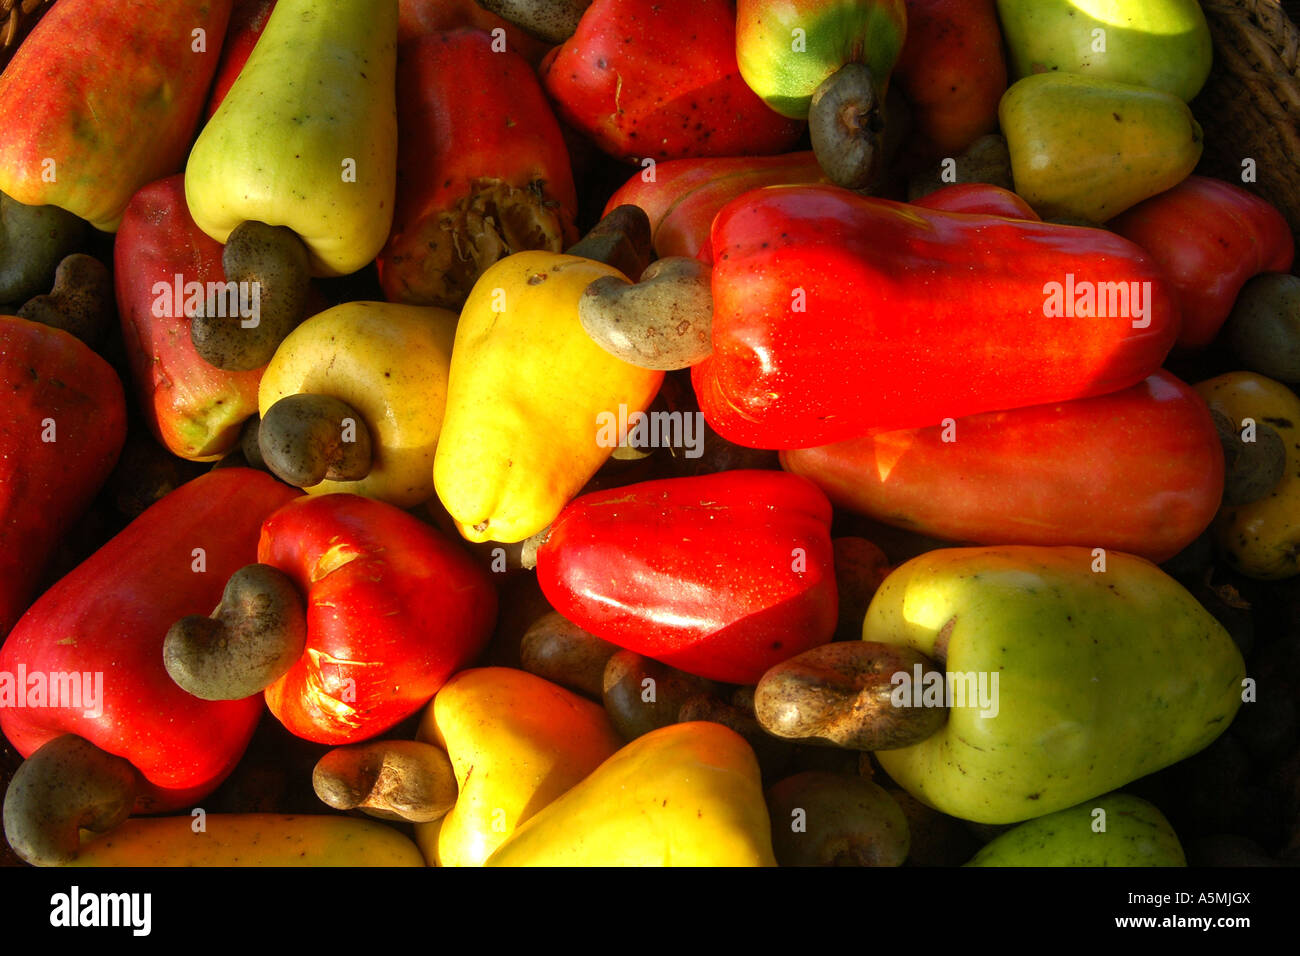 Cashew Baum High Resolution Stock Photography and Images - Alamy